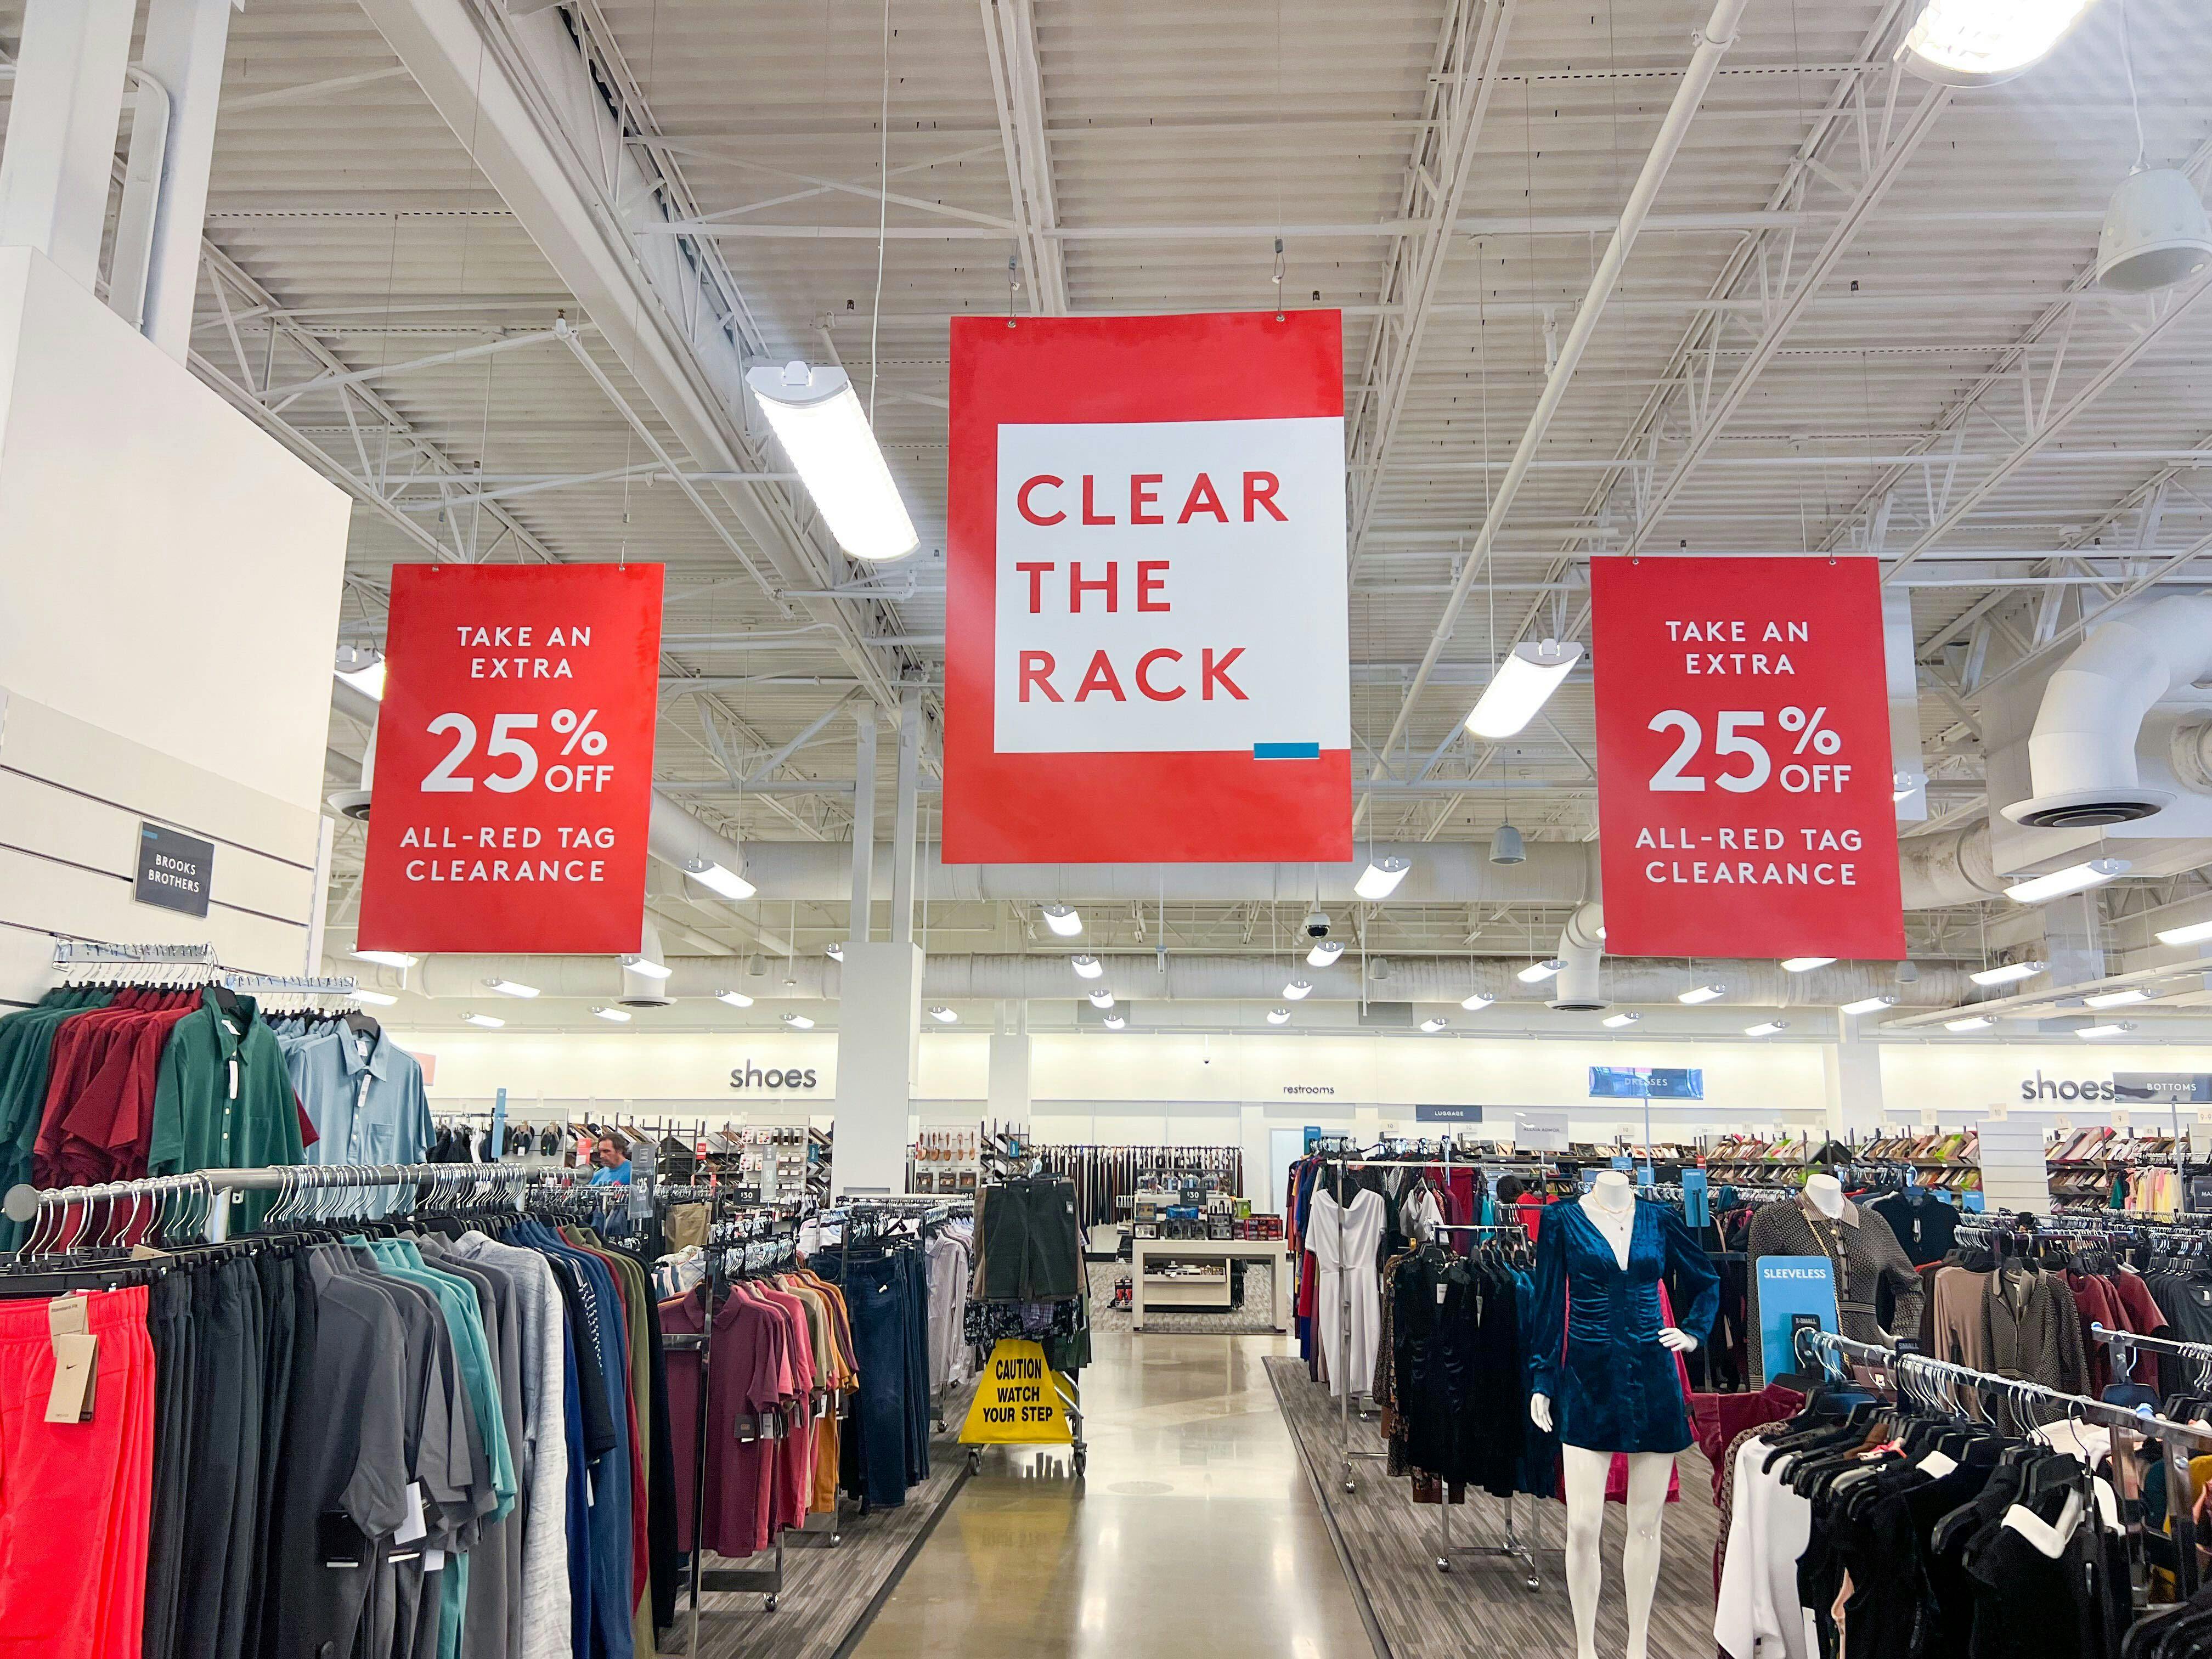 clearance off clearance nordstrom rack